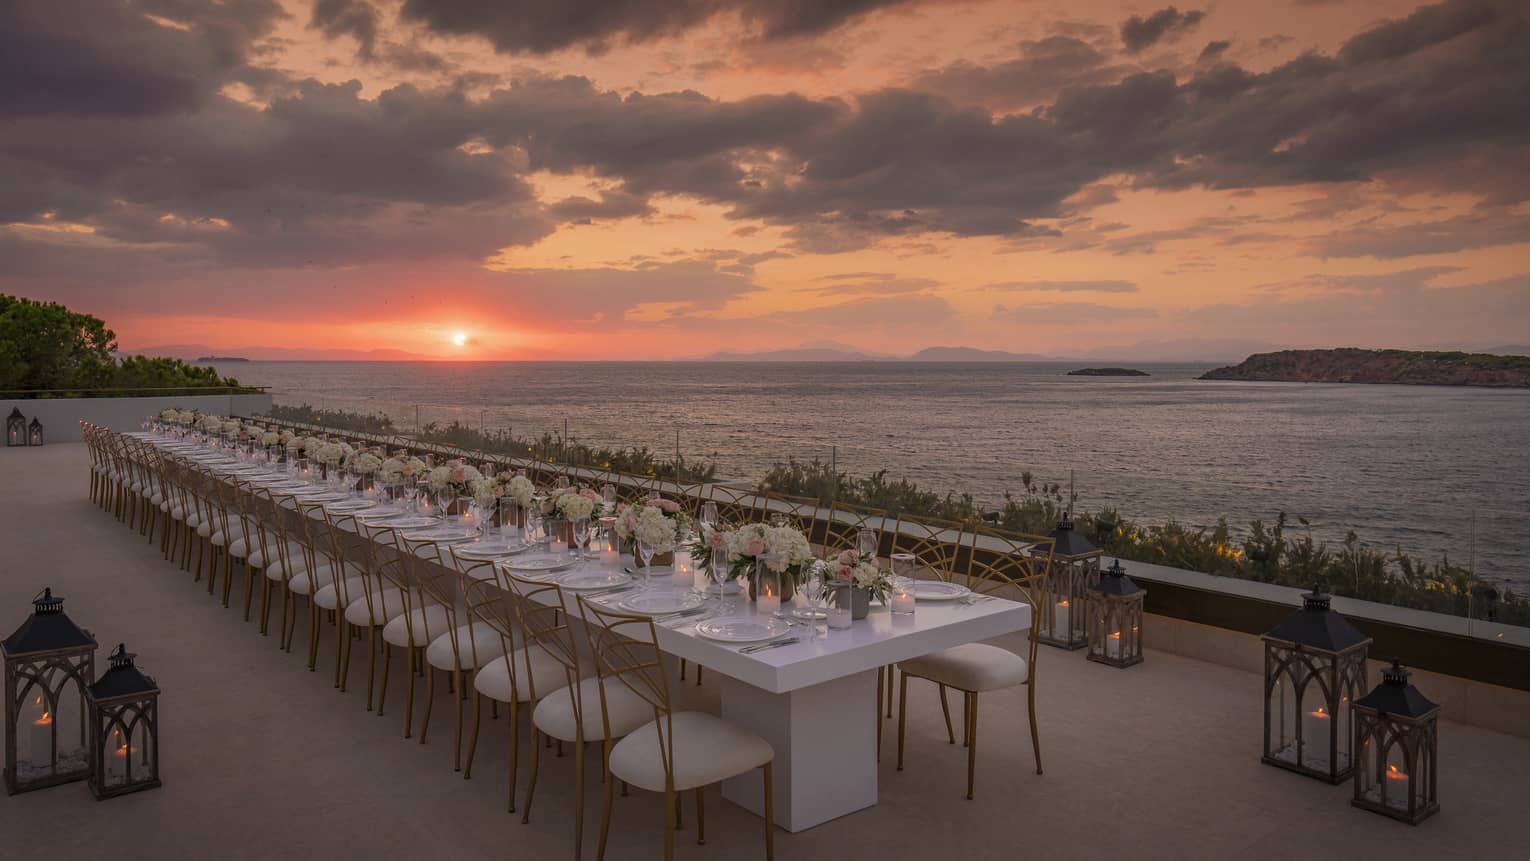 Sunset view over a beautifully arranged outdoor dining setup at Four Seasons Hotel Athens, with elegant table settings and scenic sea views.